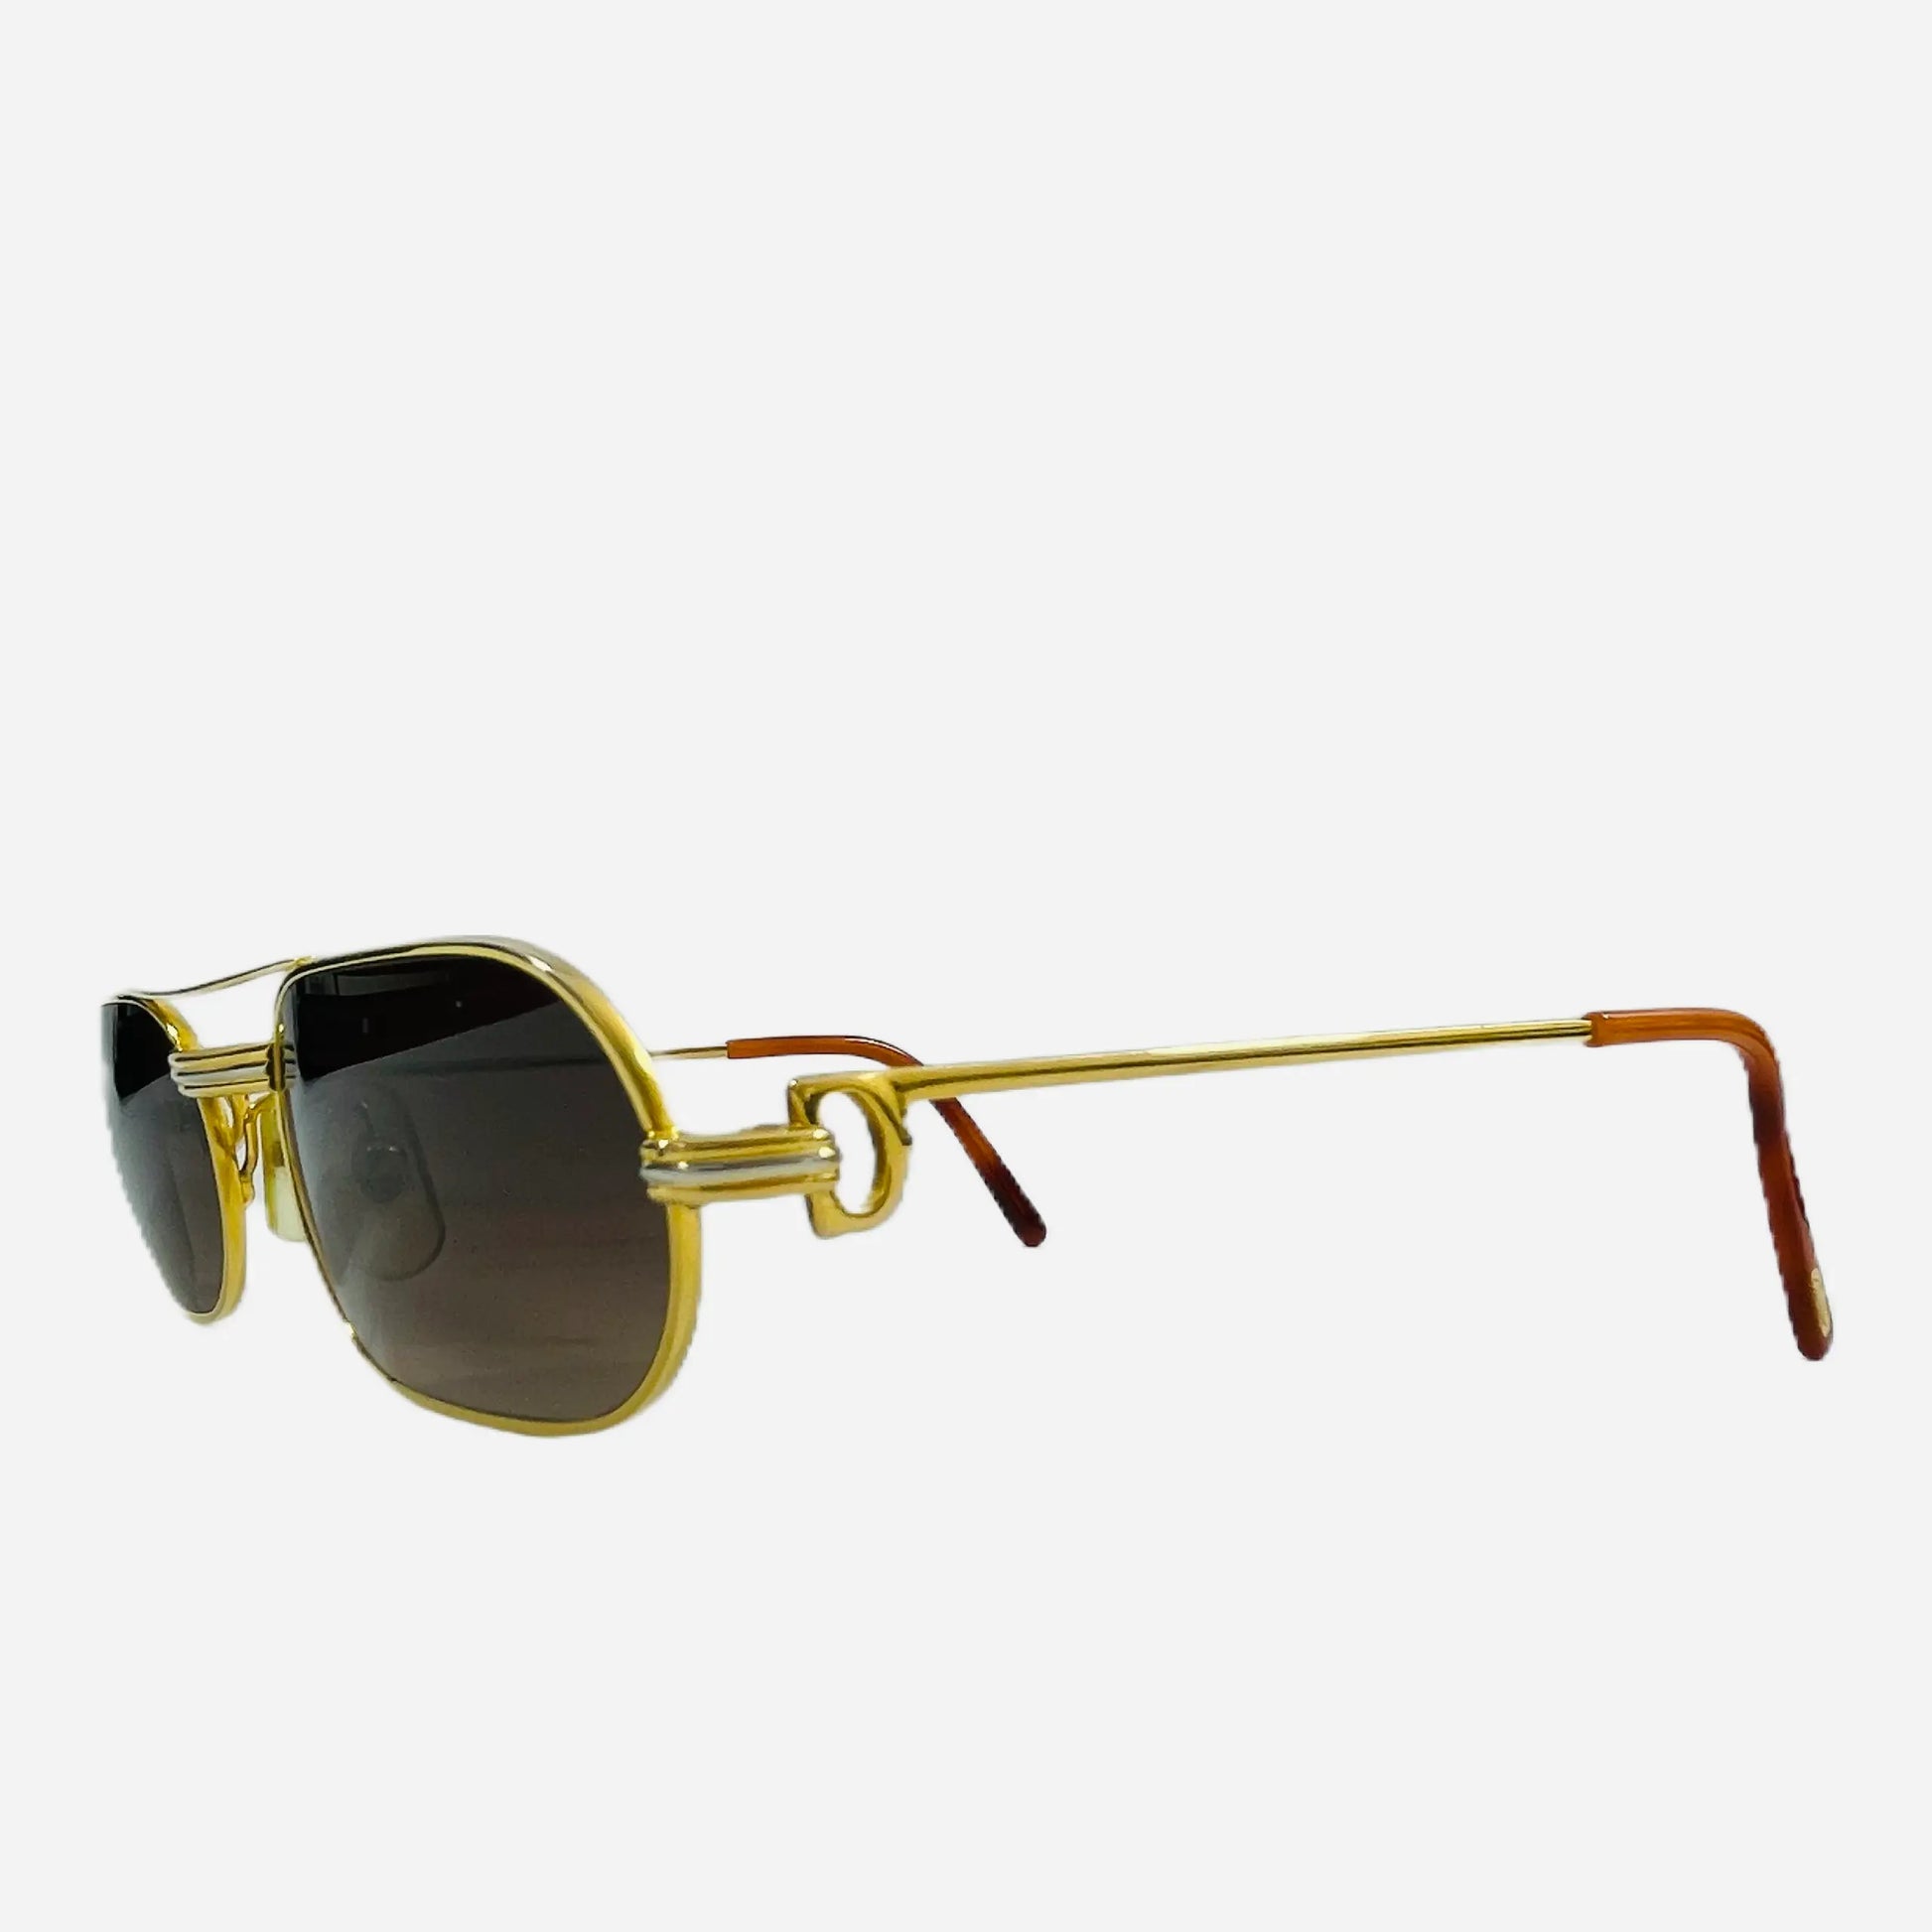 Vintage-Cartier-Ascot-Must-Louis-Sonnenbrille-Sunglasses-22CT-Gold-Plated-Custom-the-seekers-front-side-2